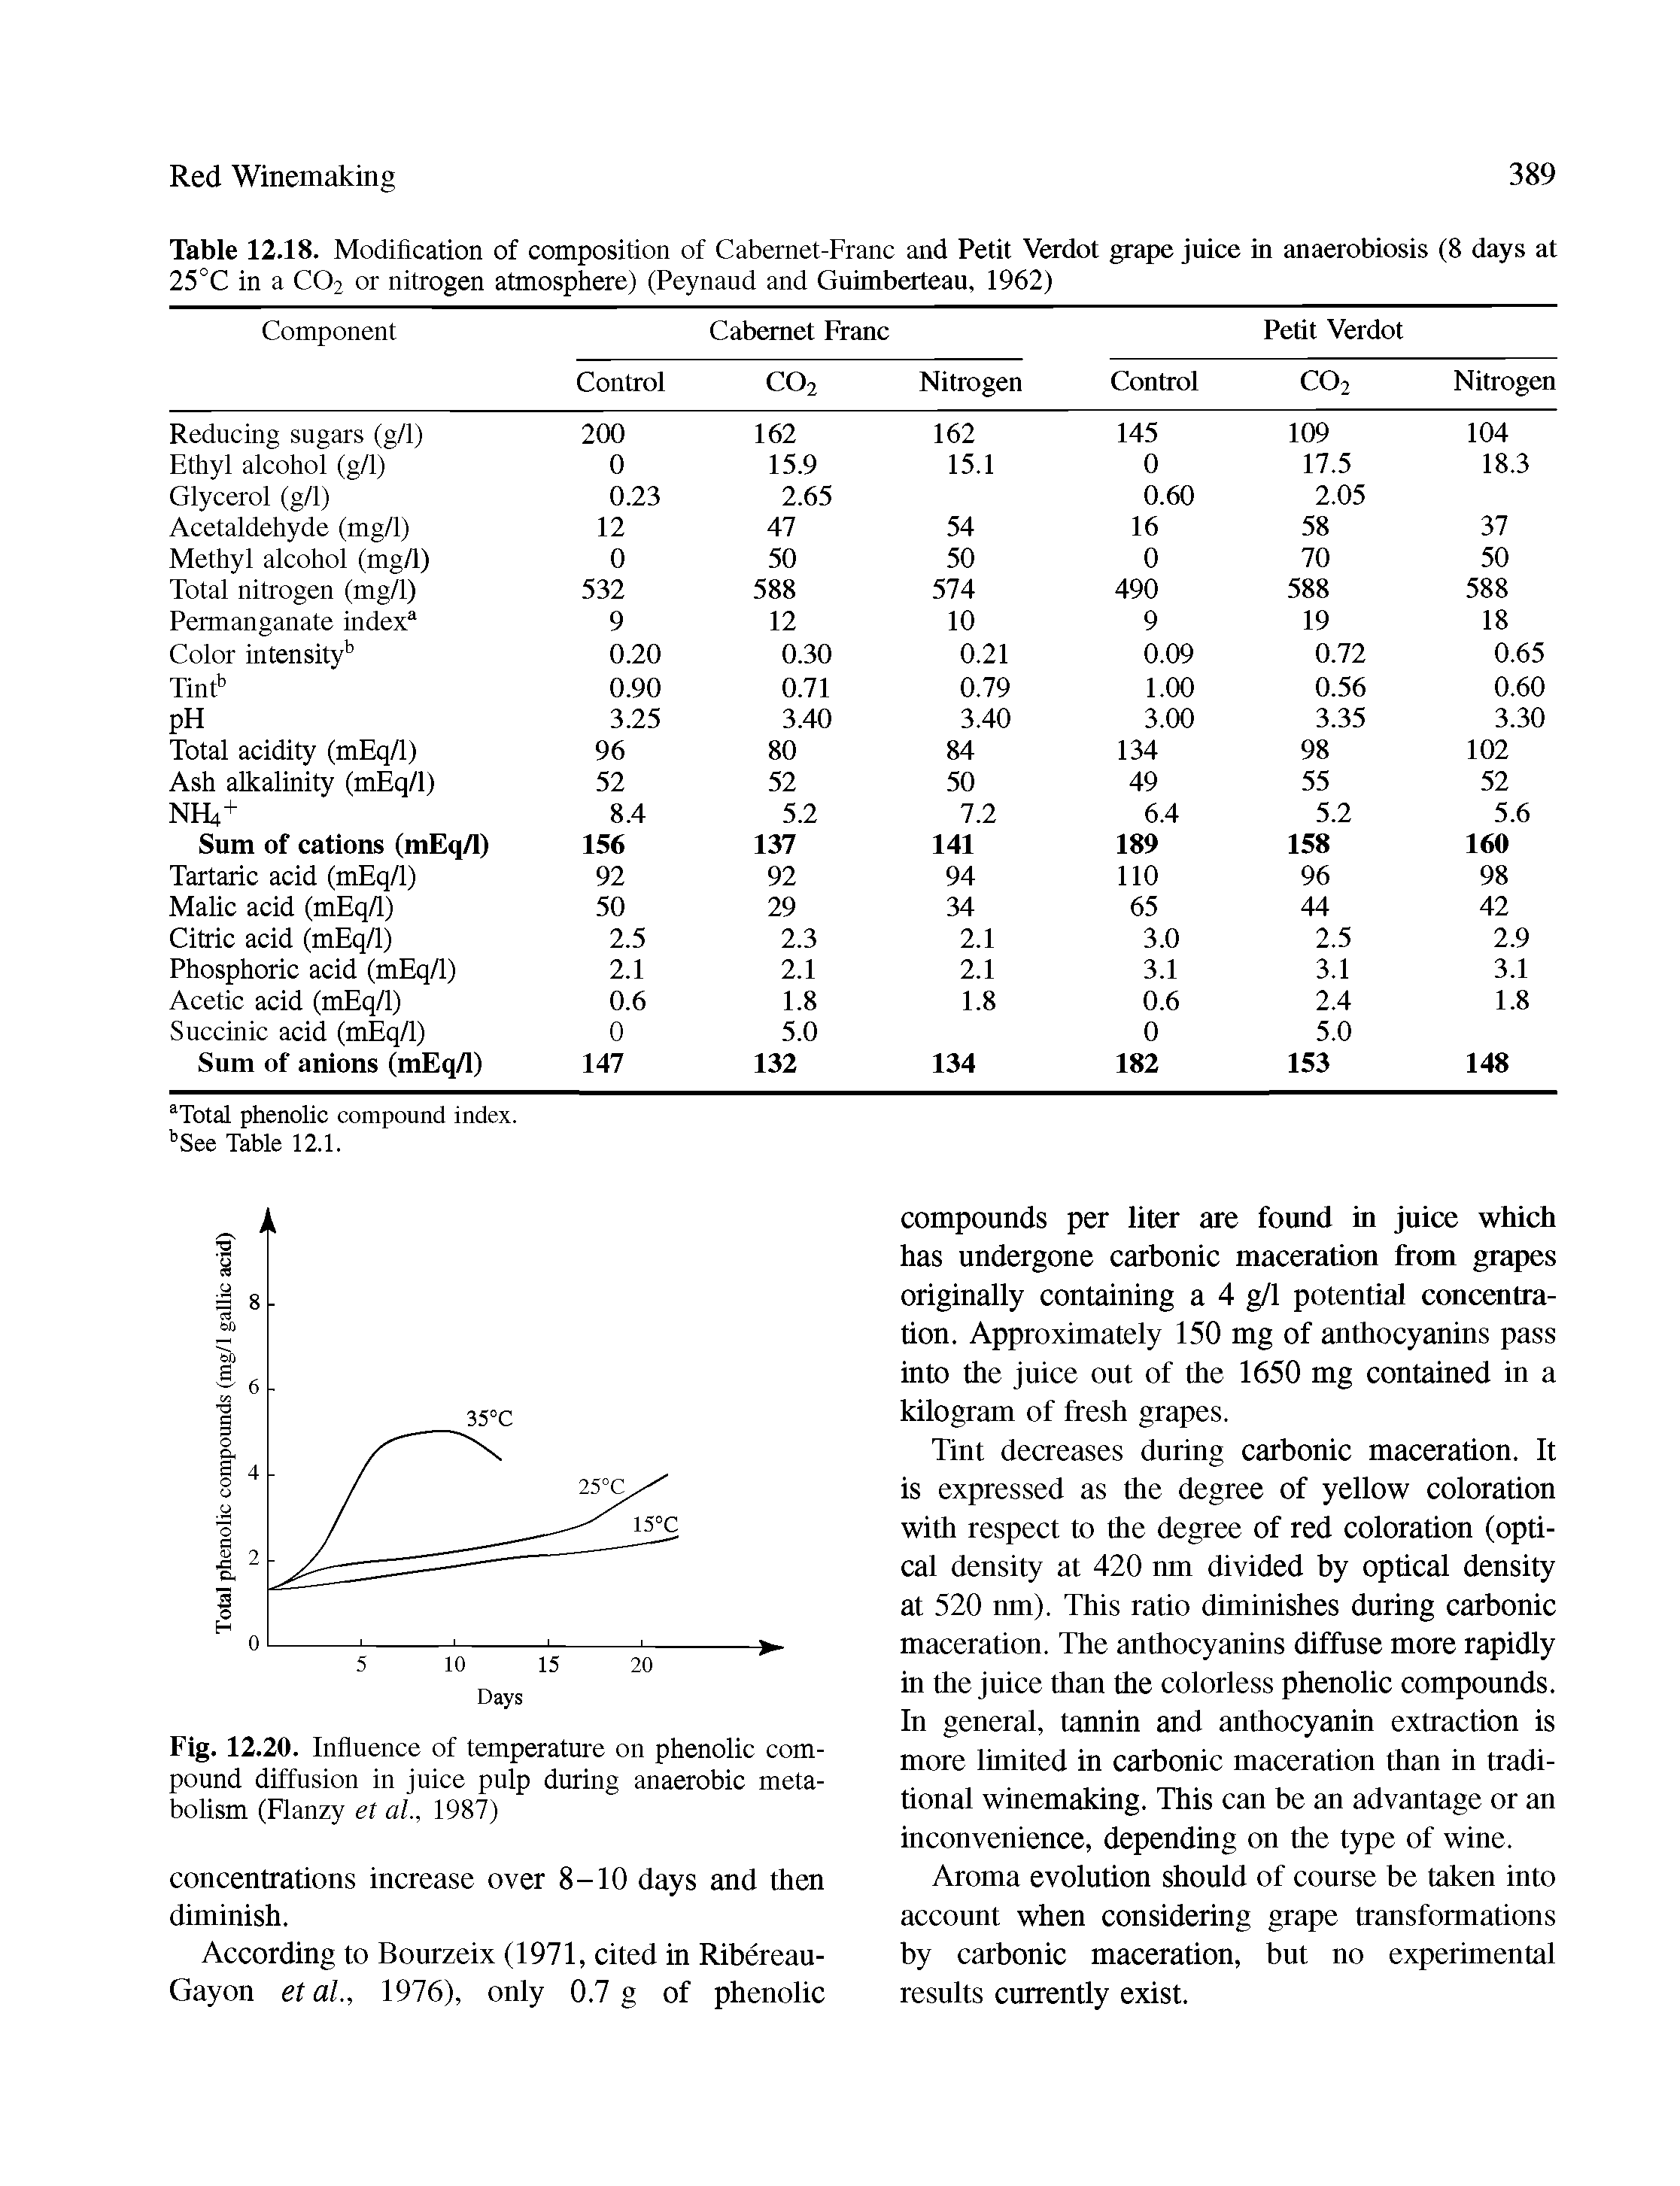 Table 12.18. Modification of composition of Cabernet-Franc and Petit Verdot grape juice in anaerobiosis (8 days at 25°C in a CO2 or nitrogen atmosphere) (Peynaud and Guimberteau, 1962)...